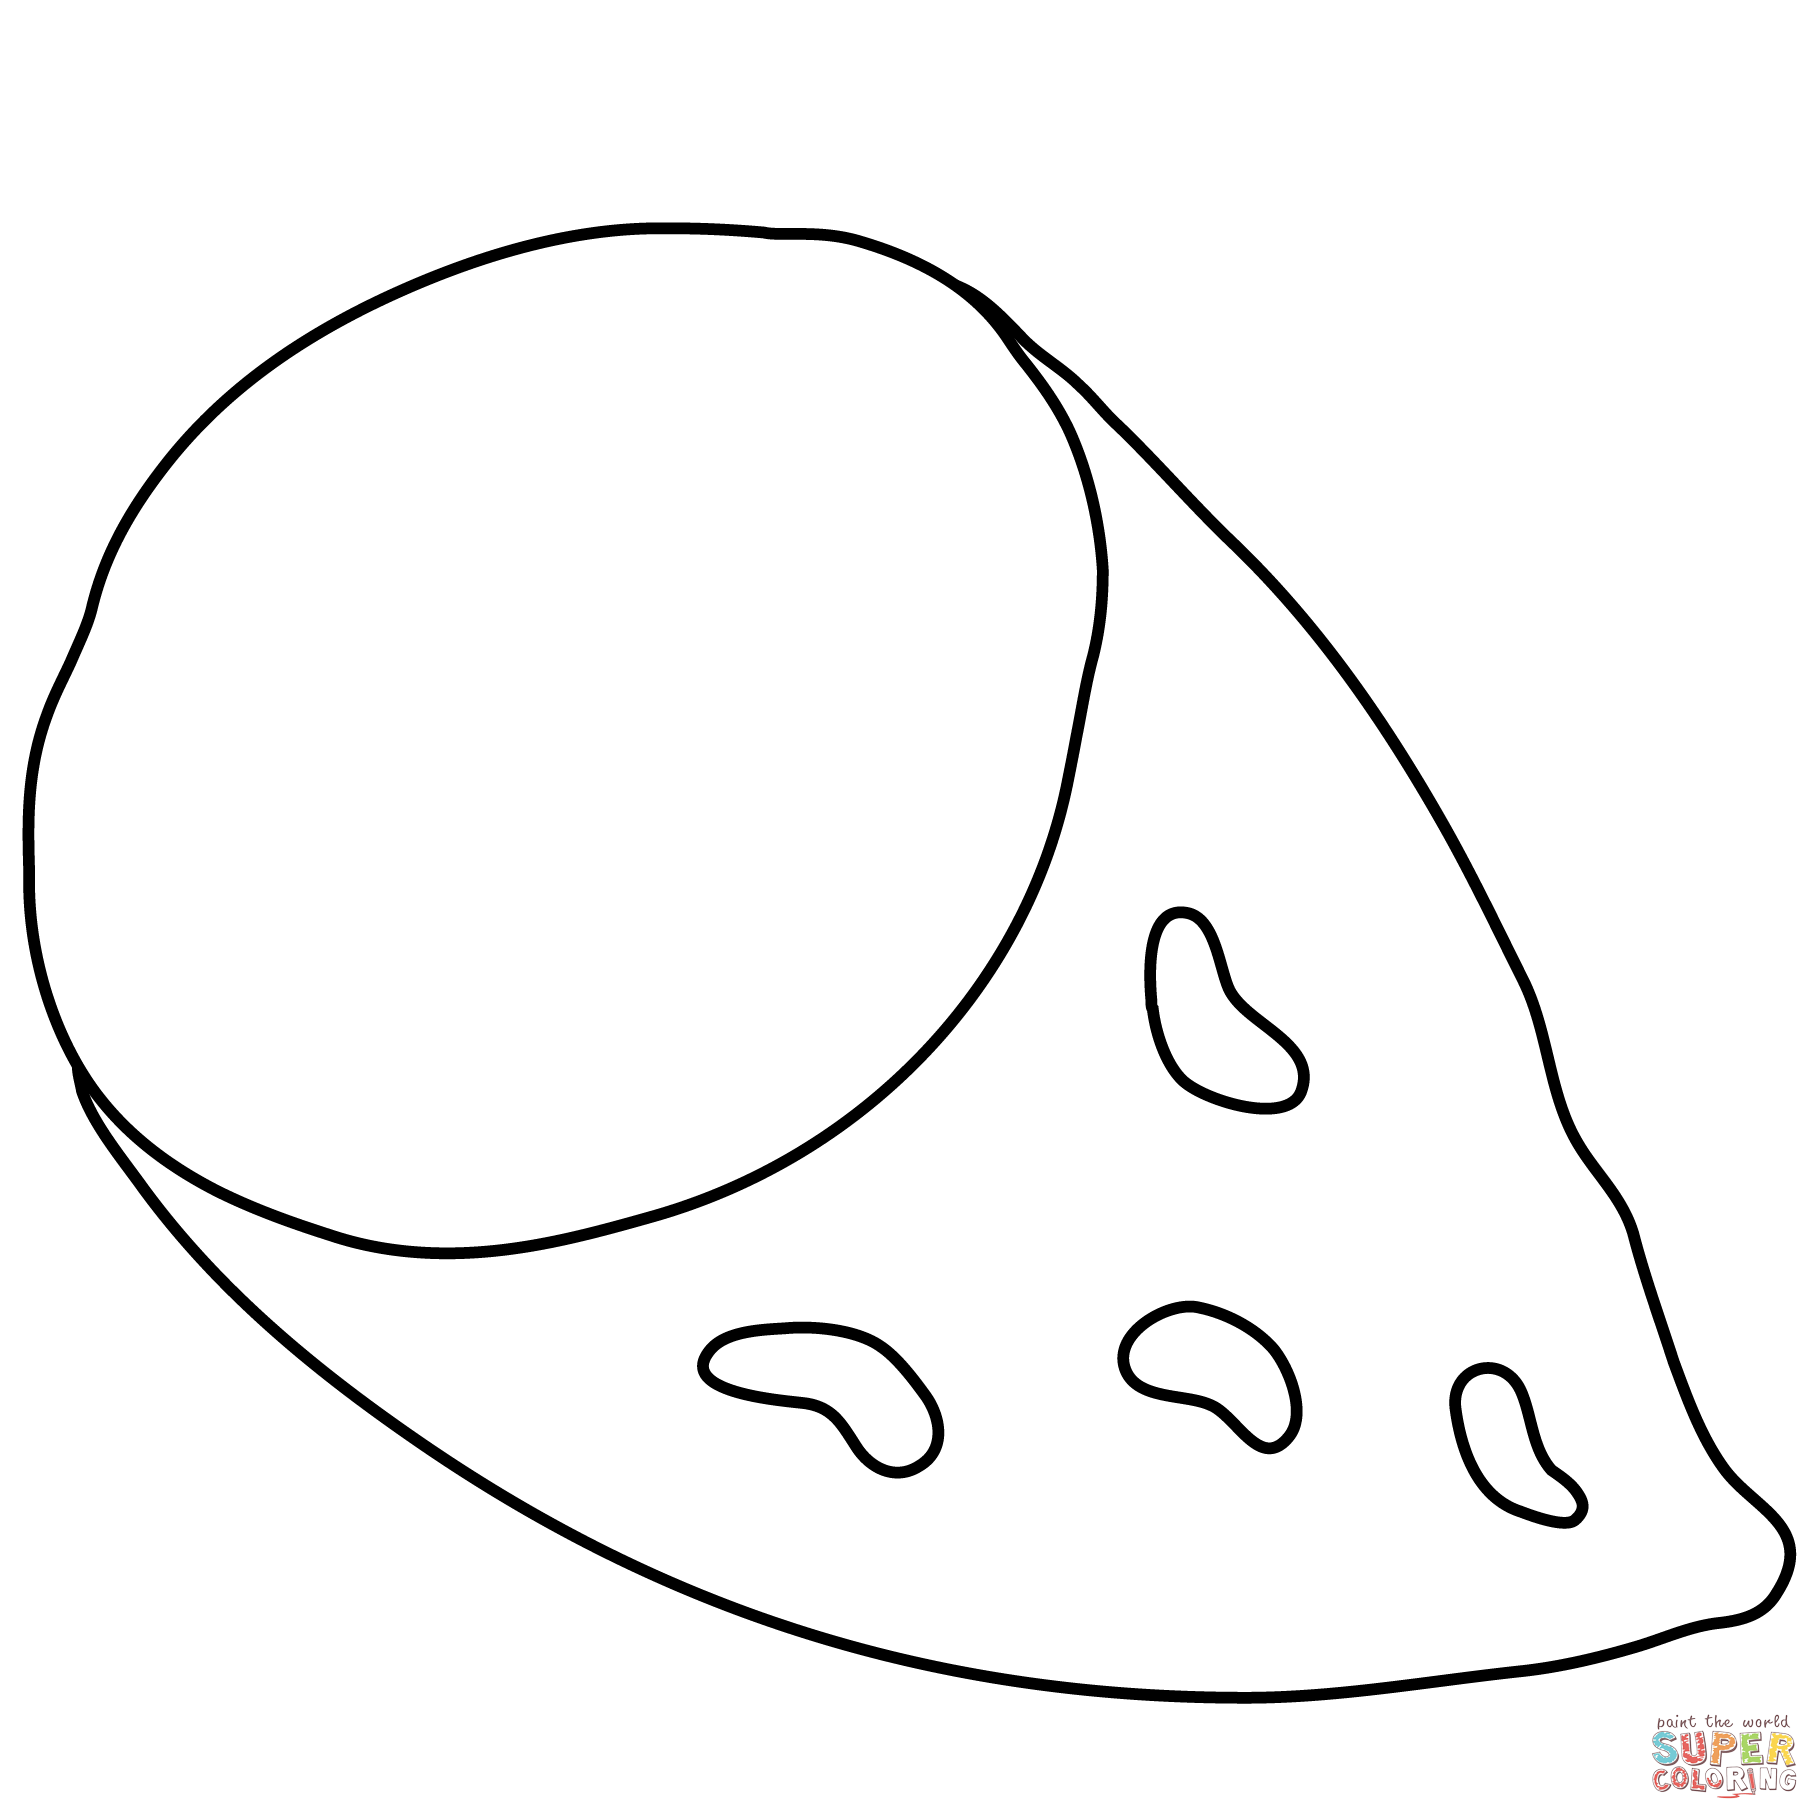 Roasted sweet potato emoji coloring page free printable coloring pages